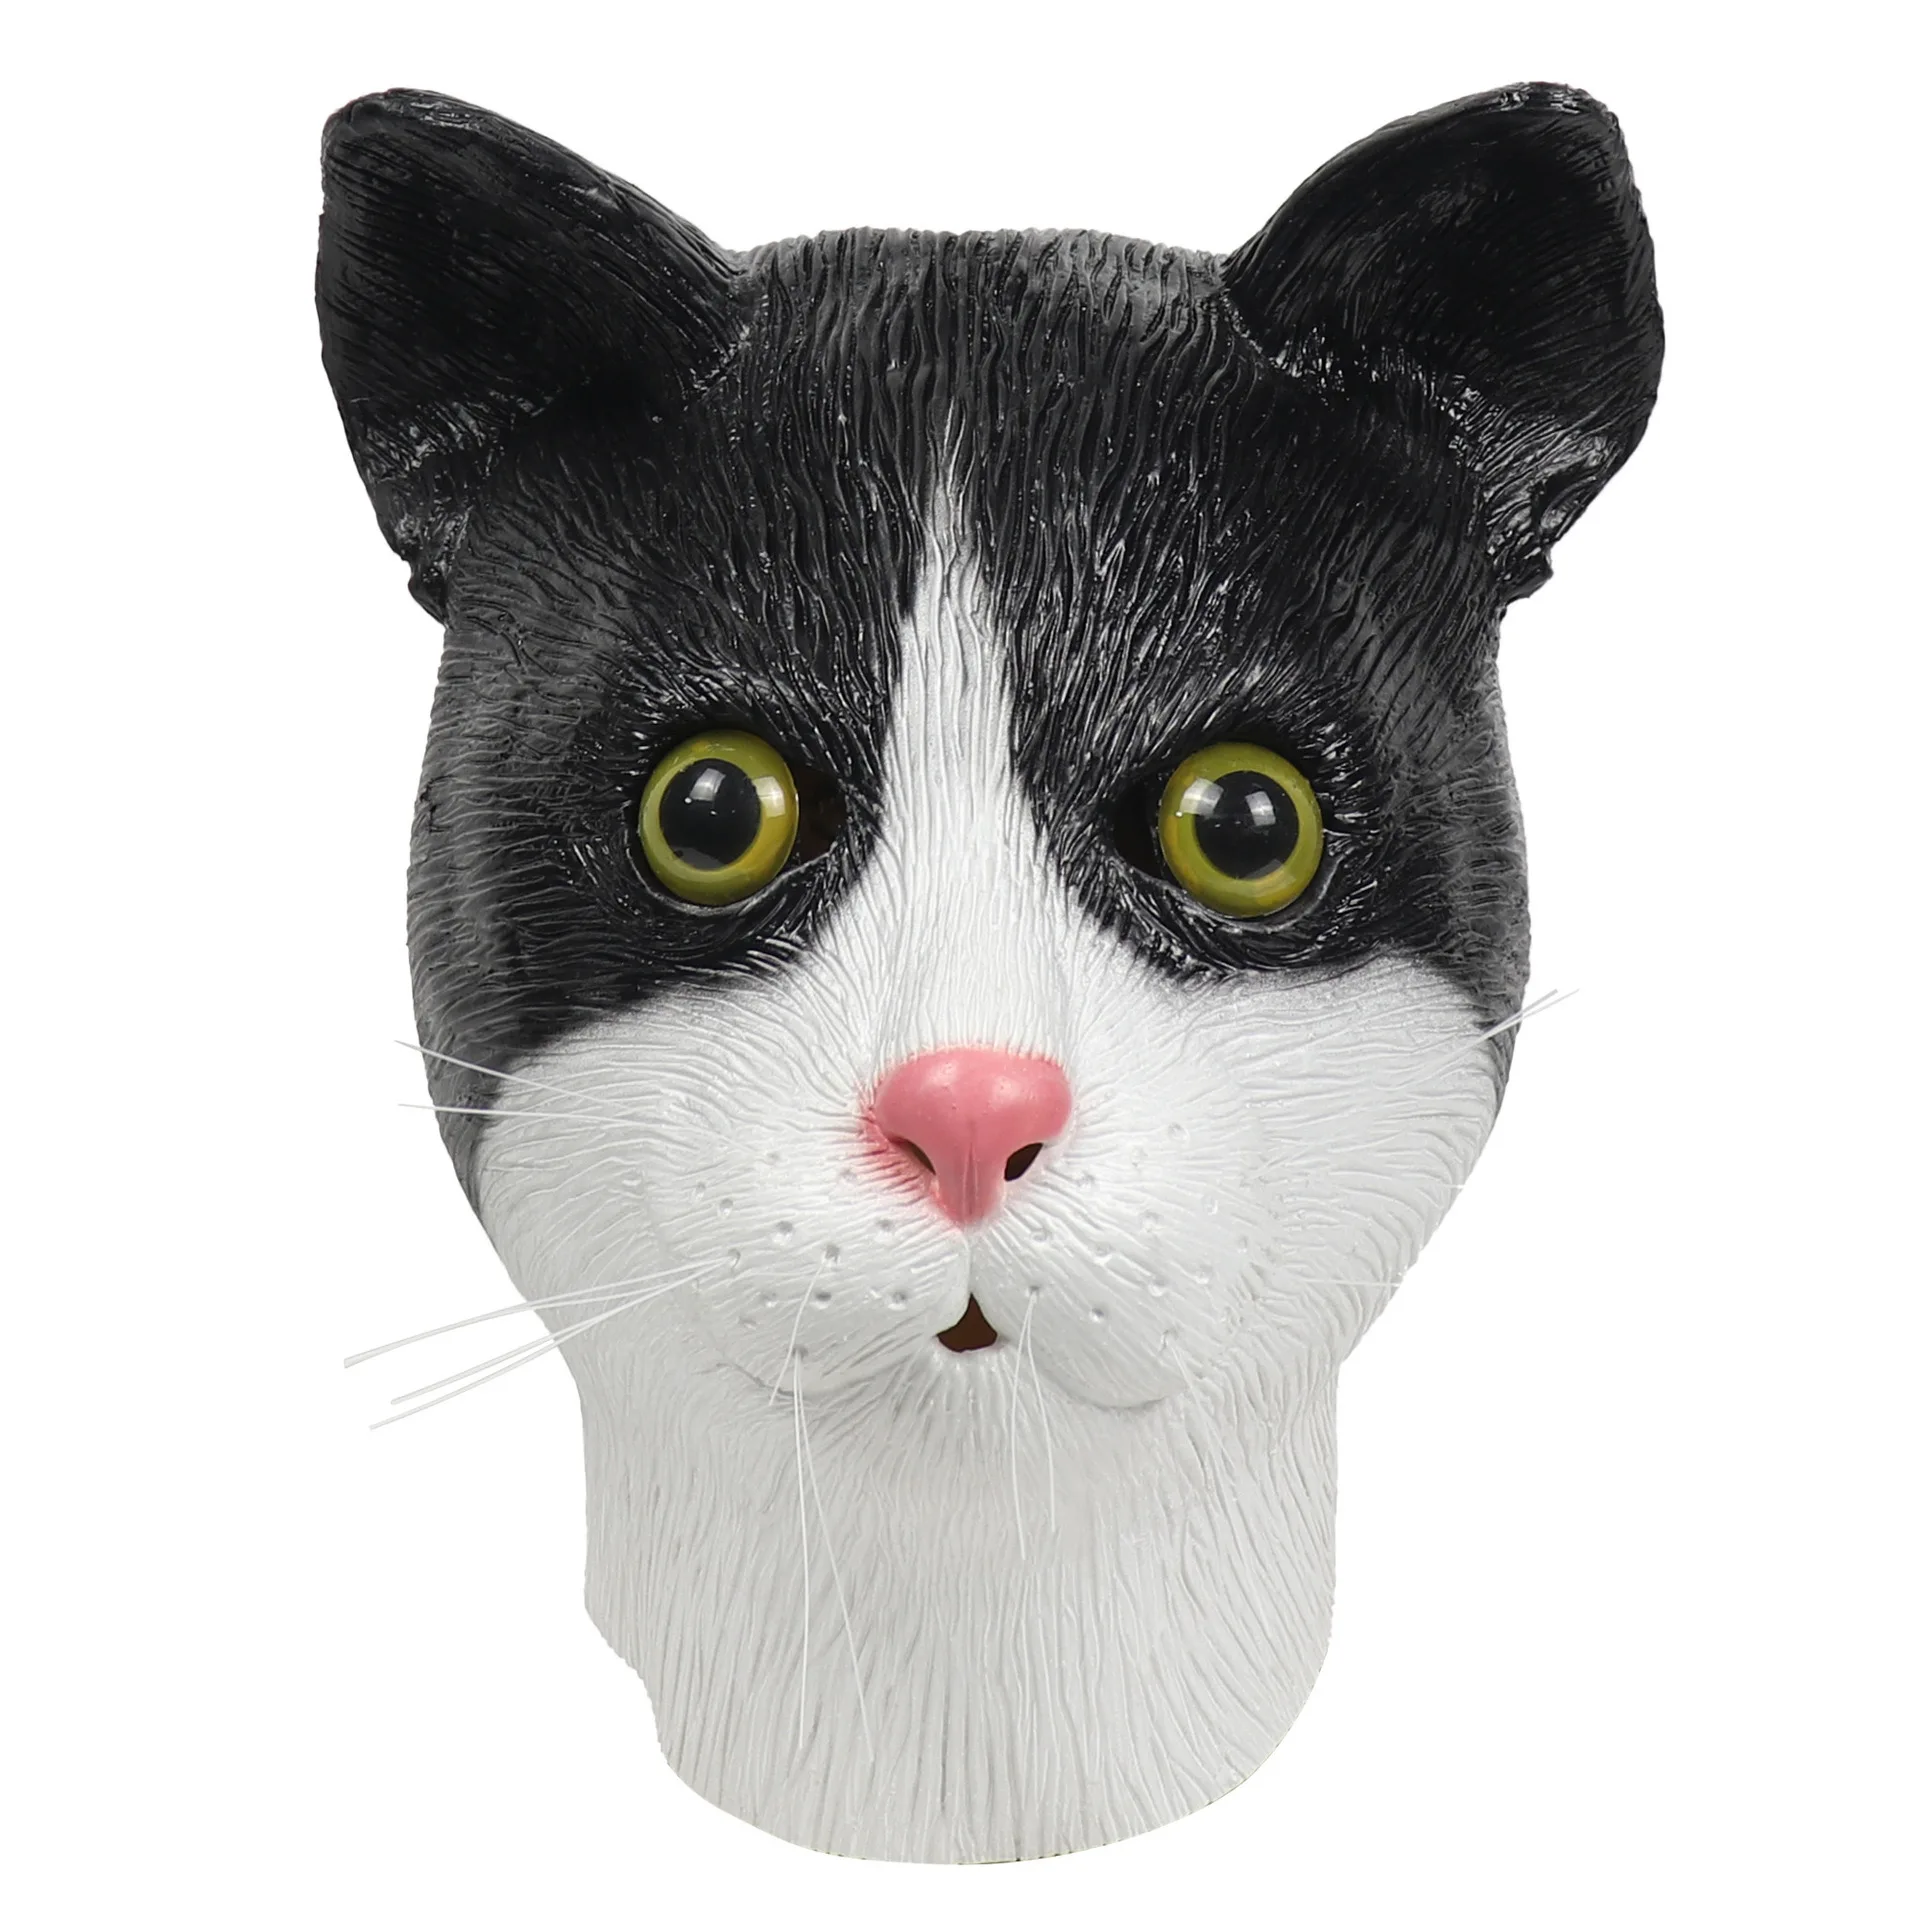 Animal cat Mask Novelty Funny Adults Late Full Head Mask for Halloween Cute Costume Cosplay Party Props for Unisex For adults